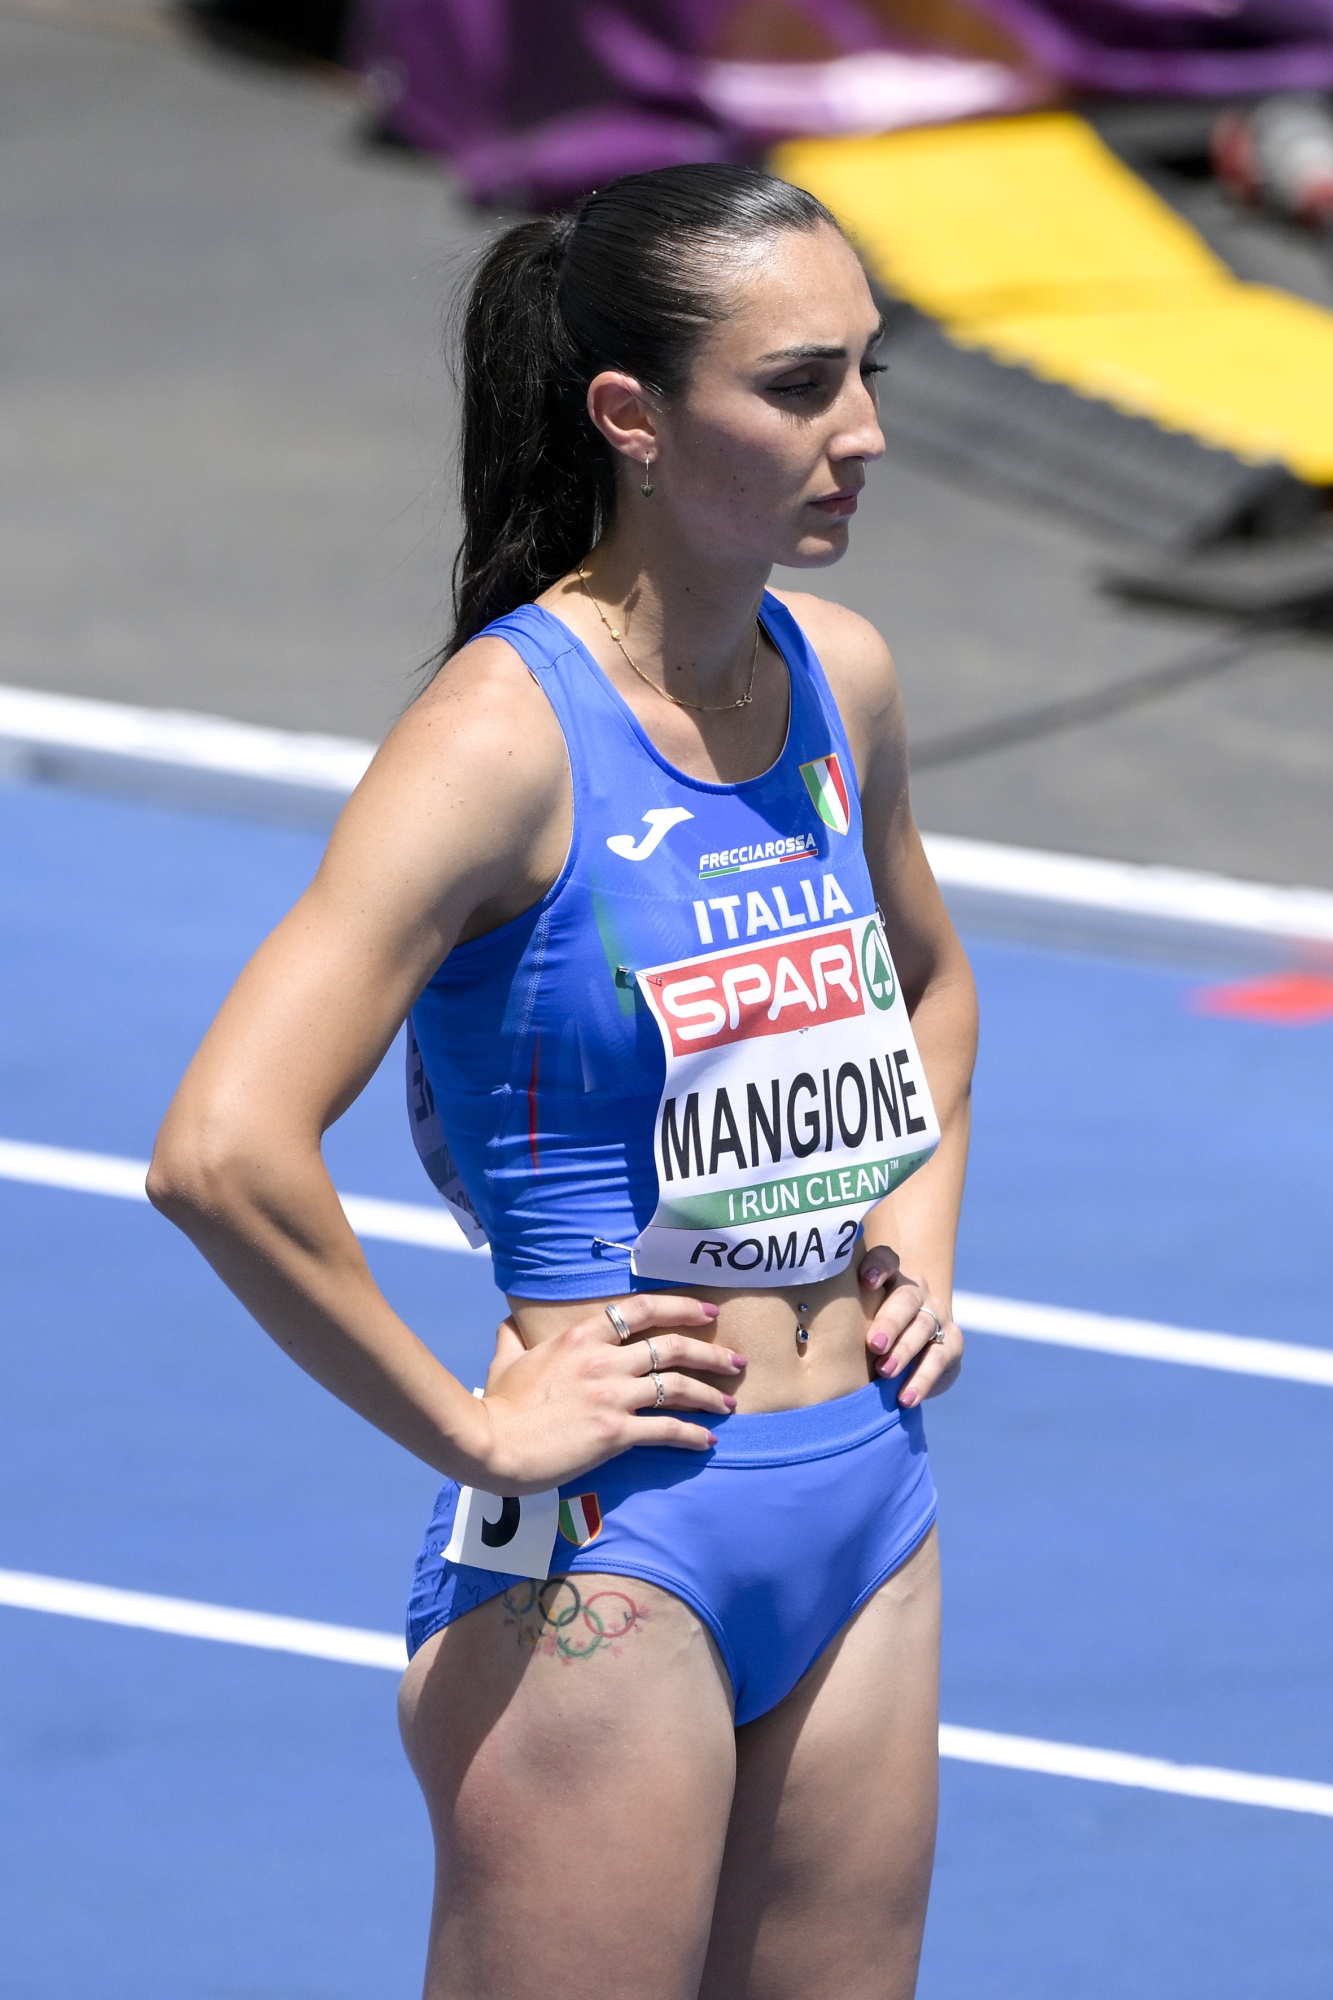 Italy?s Alice Mangione competes 400m Women?s during the 26th edition of Rome 2024 European Athletics Championships at the Olympic Stadium in Rome, Italy - Saturday, June 8, 2024 - Sport, Athletics (Photo by Fabrizio Corradetti/LaPresse)